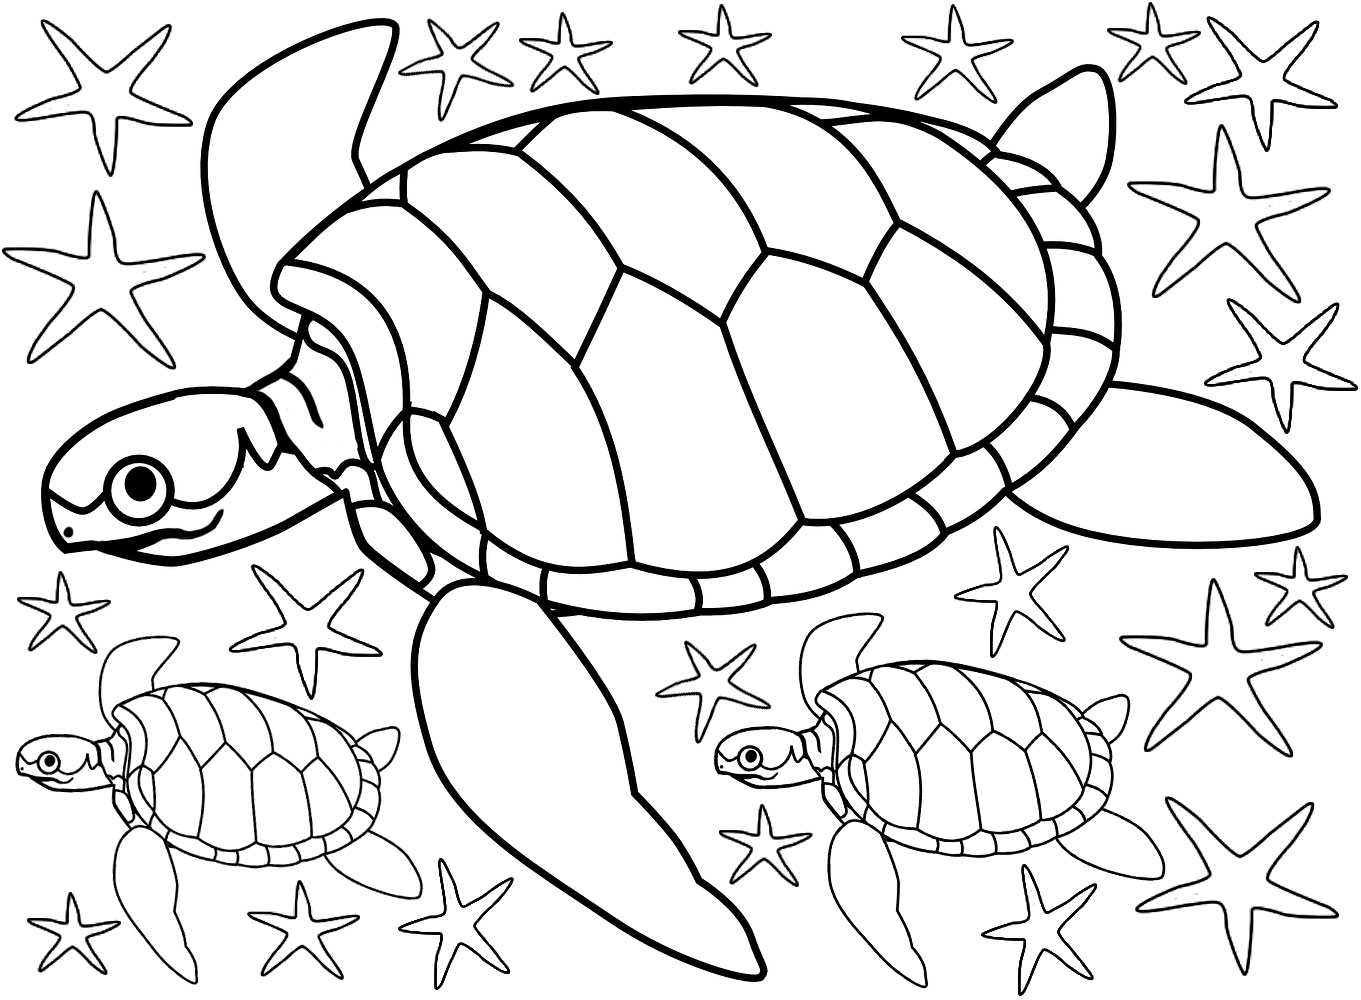 Colouring page of turtles and lots of starfish